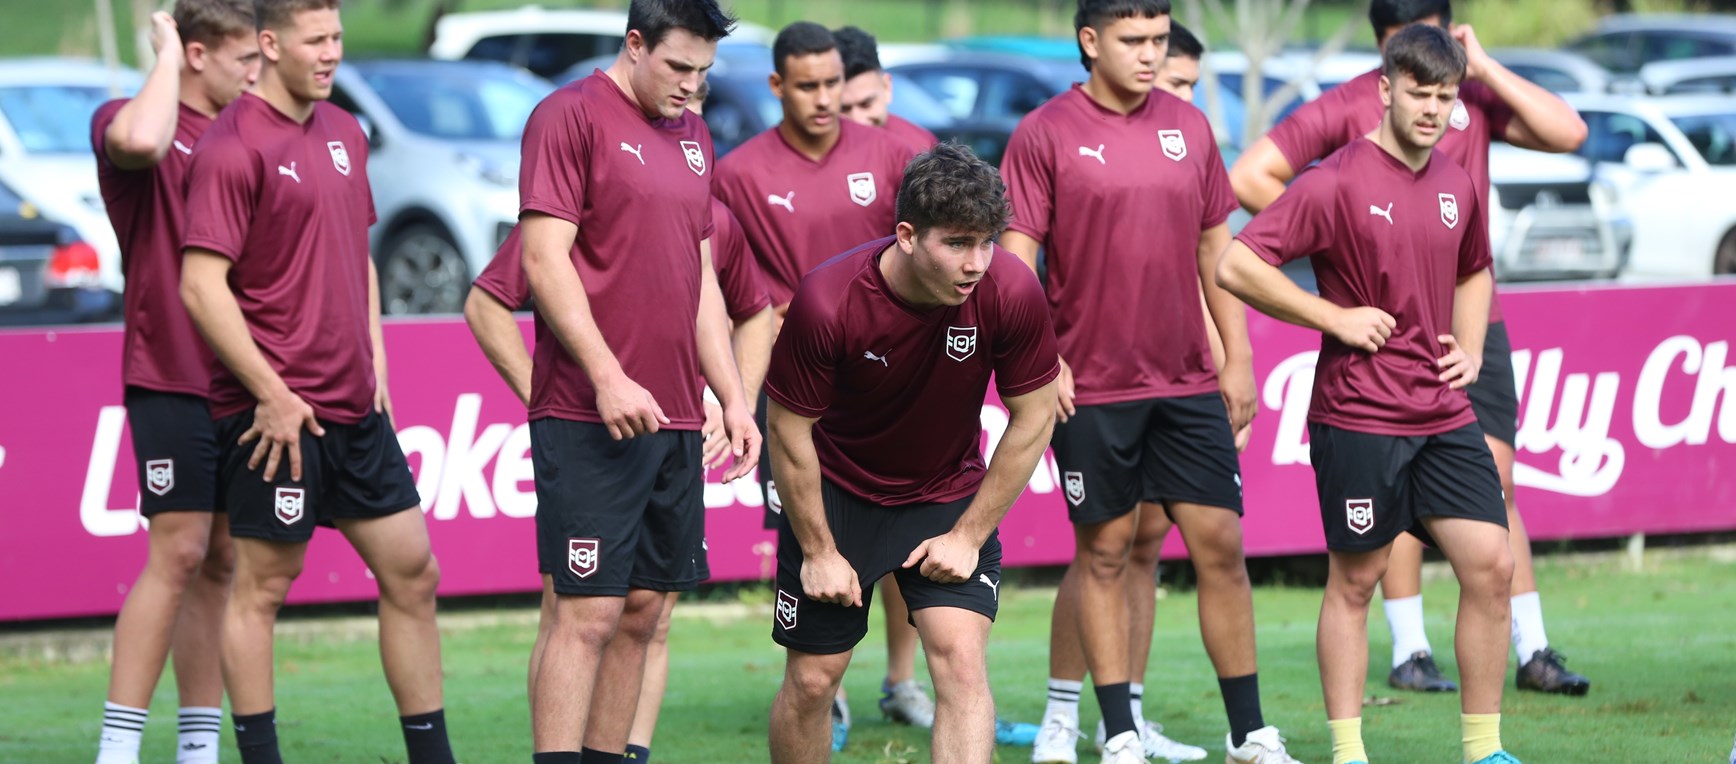 In pictures: Queensland Under 19 boys squad preparations